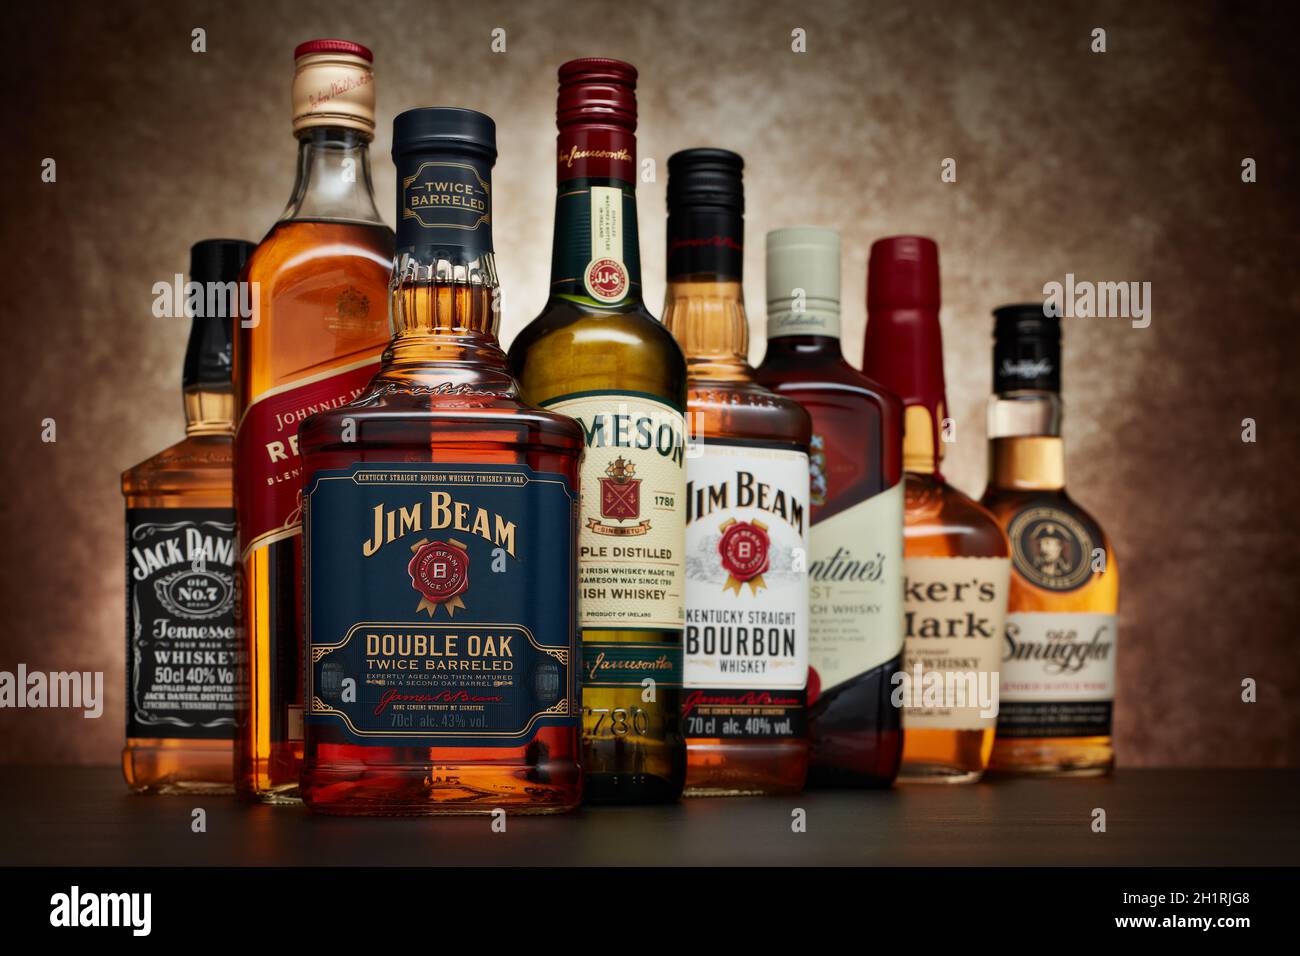 photography stock bourbon - Alamy beam 2 hi-res Jim - Page and images